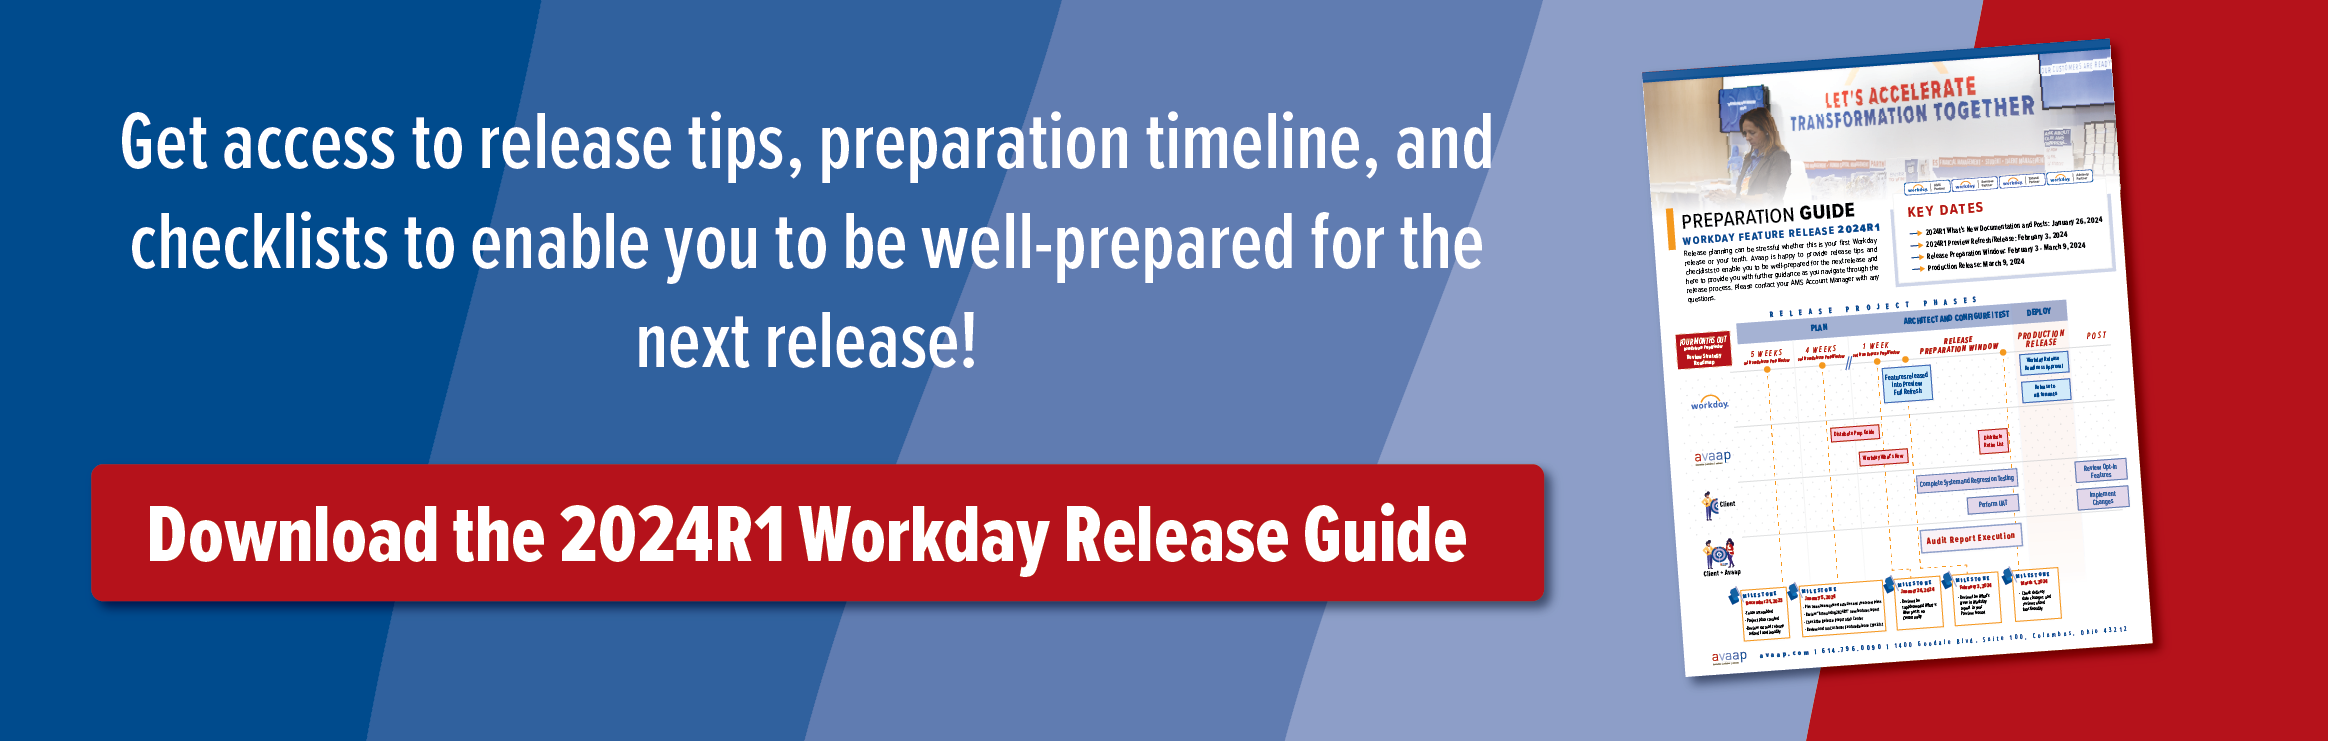 Workday Release Guide